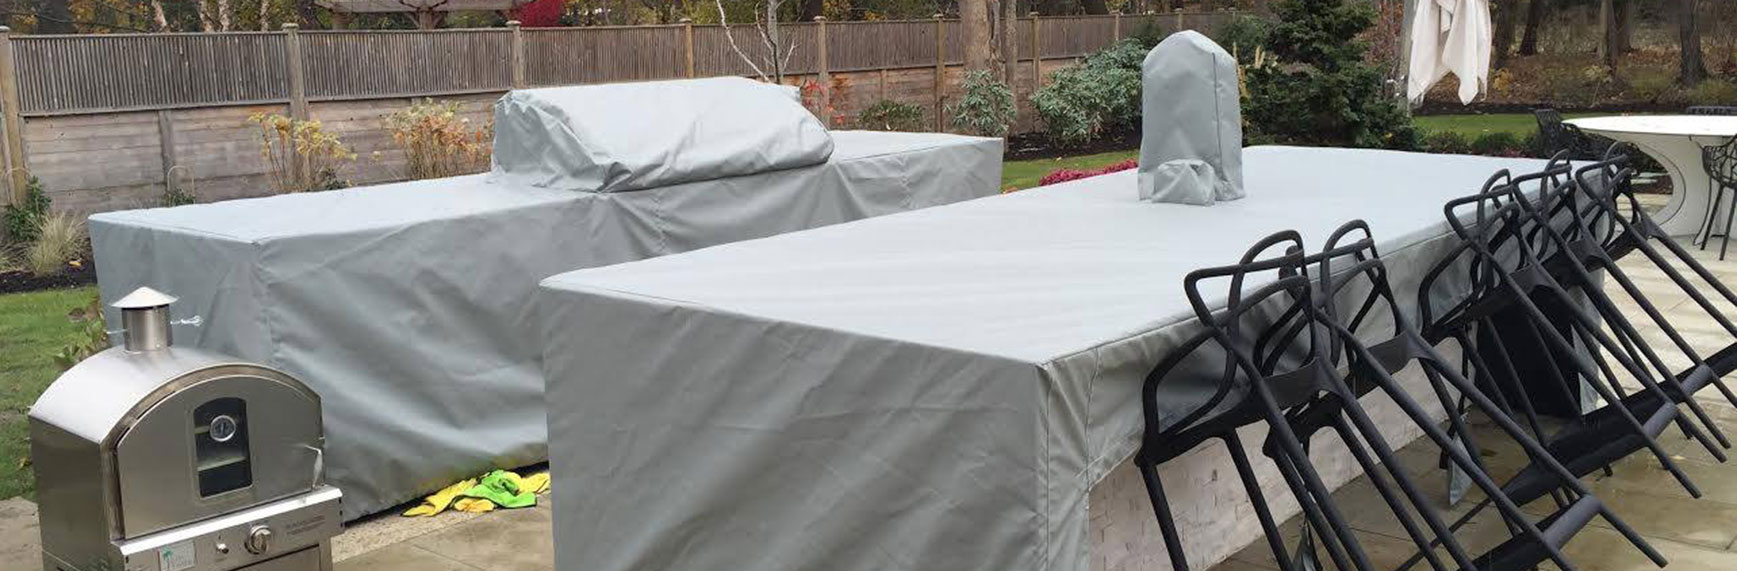 Outdoor Covers